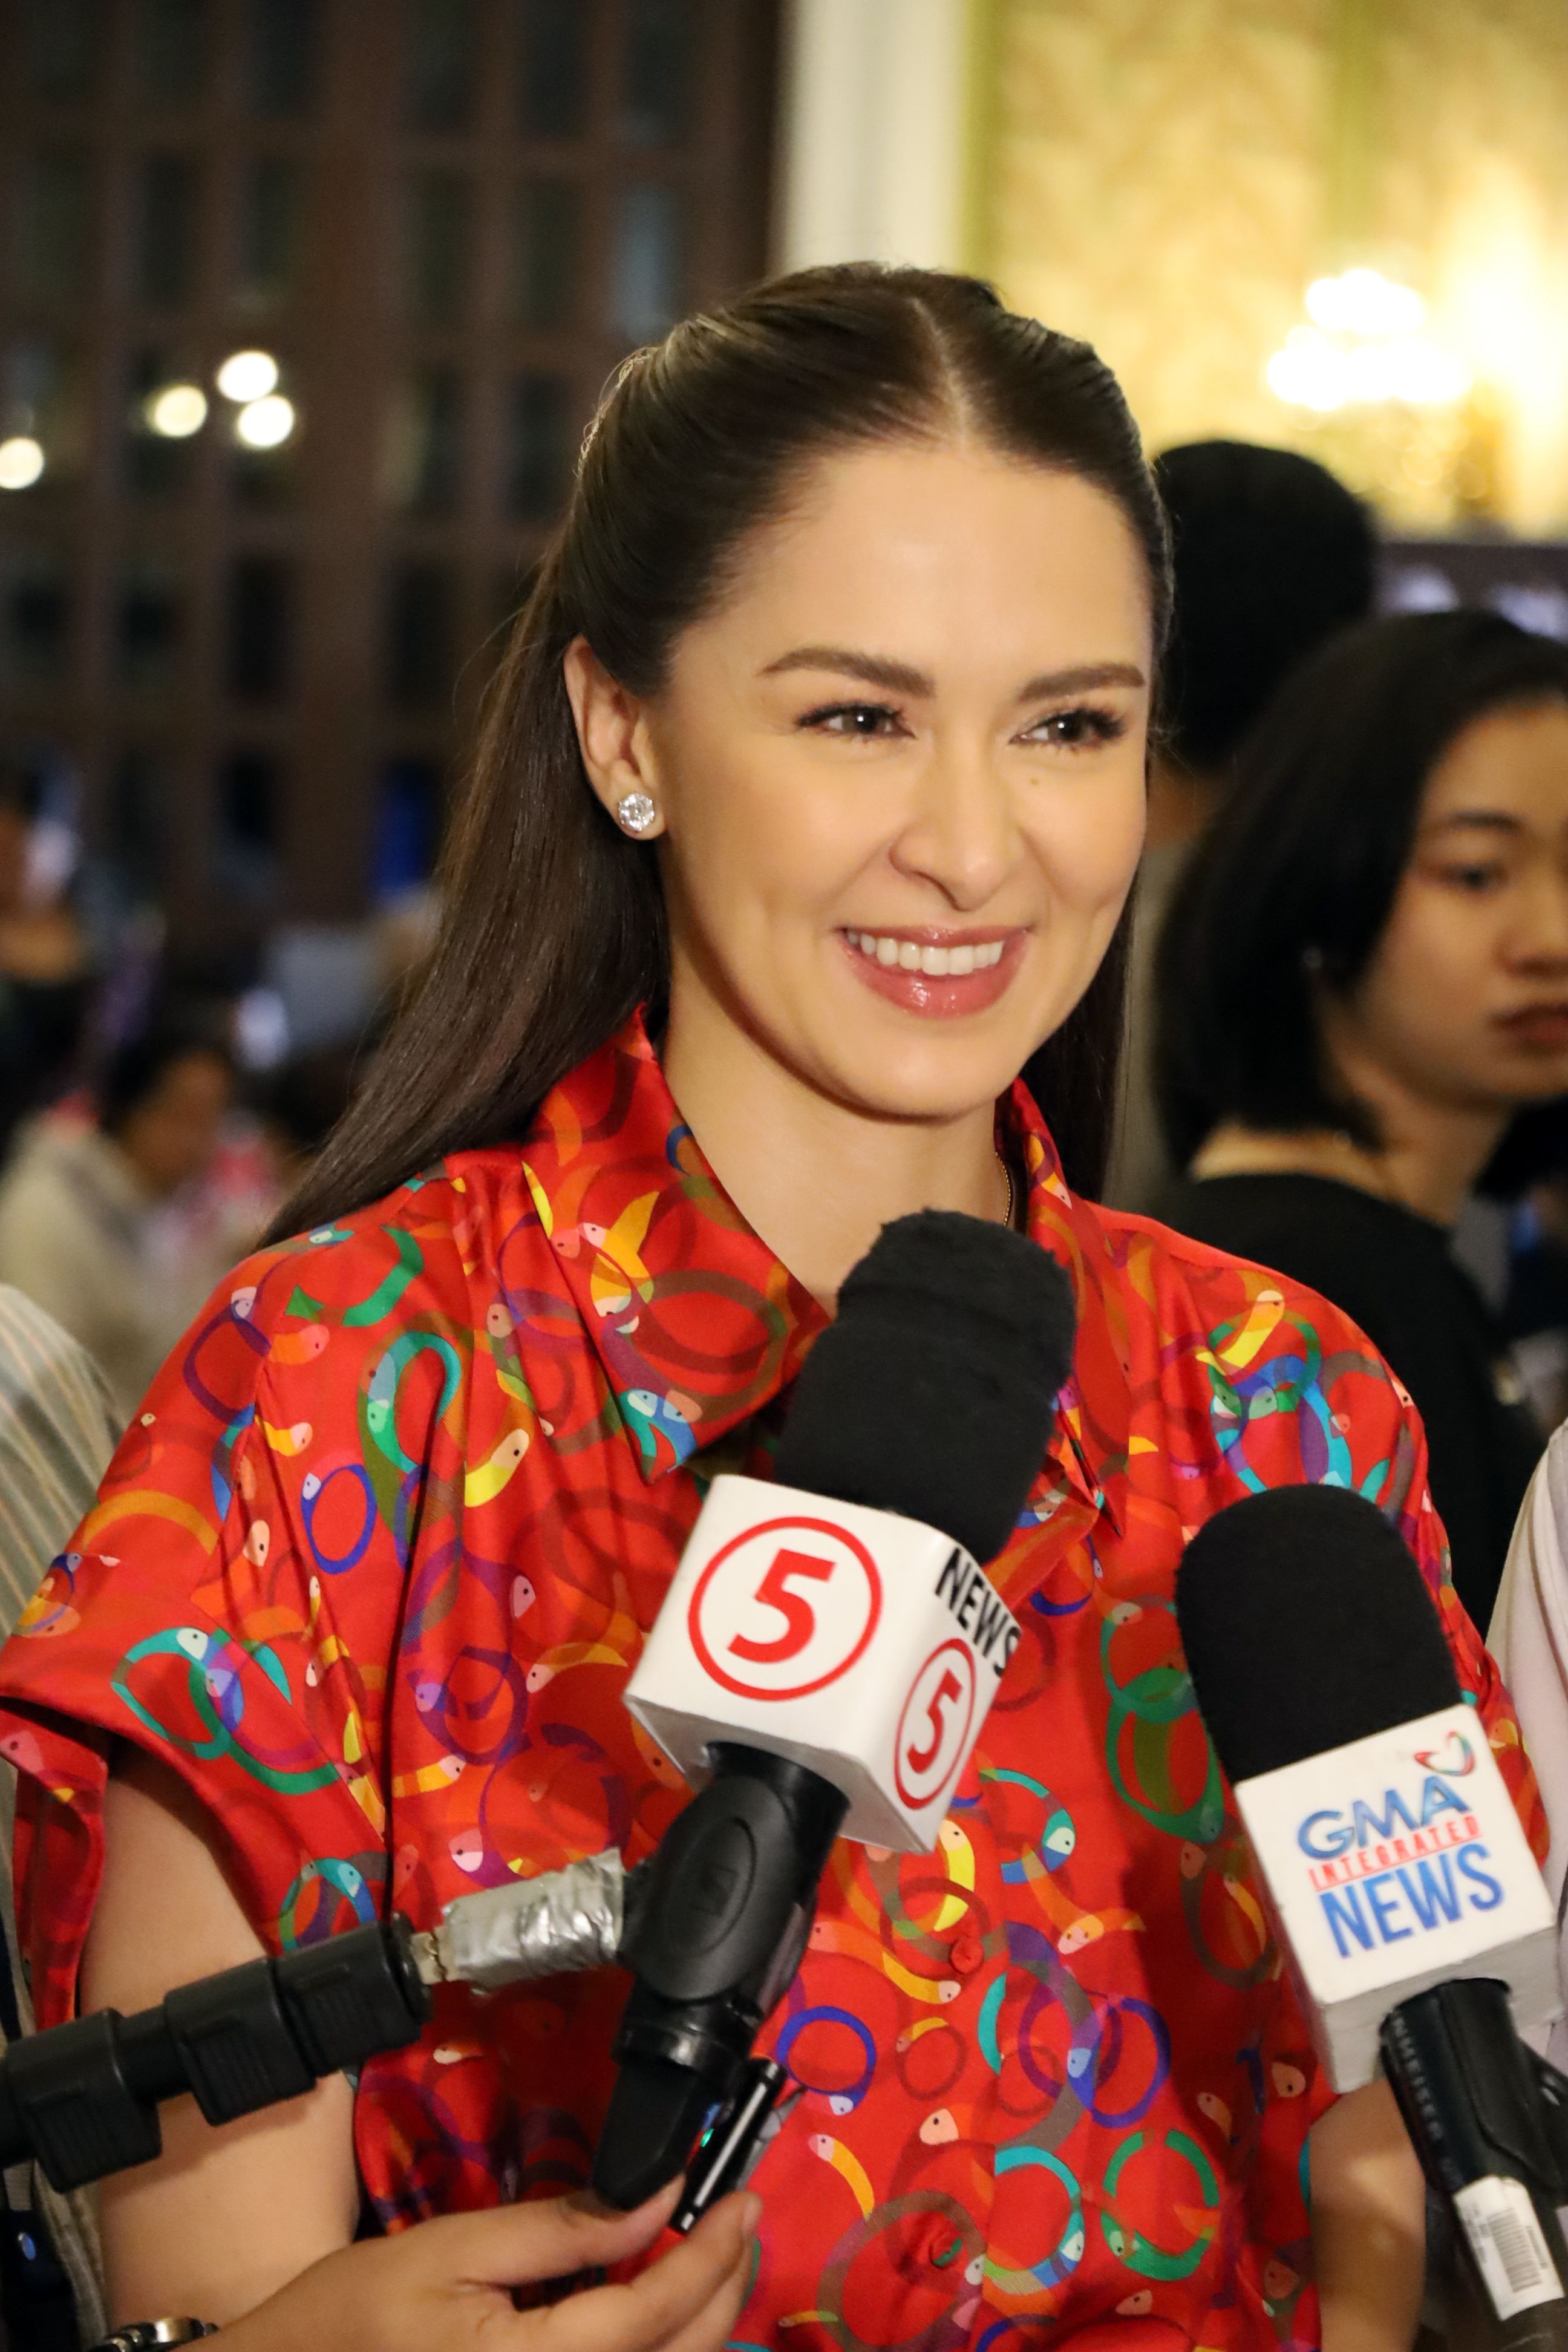 Reel Laguna, elsewhere situates Marian Rivera as teacher-protector of ballots on election day